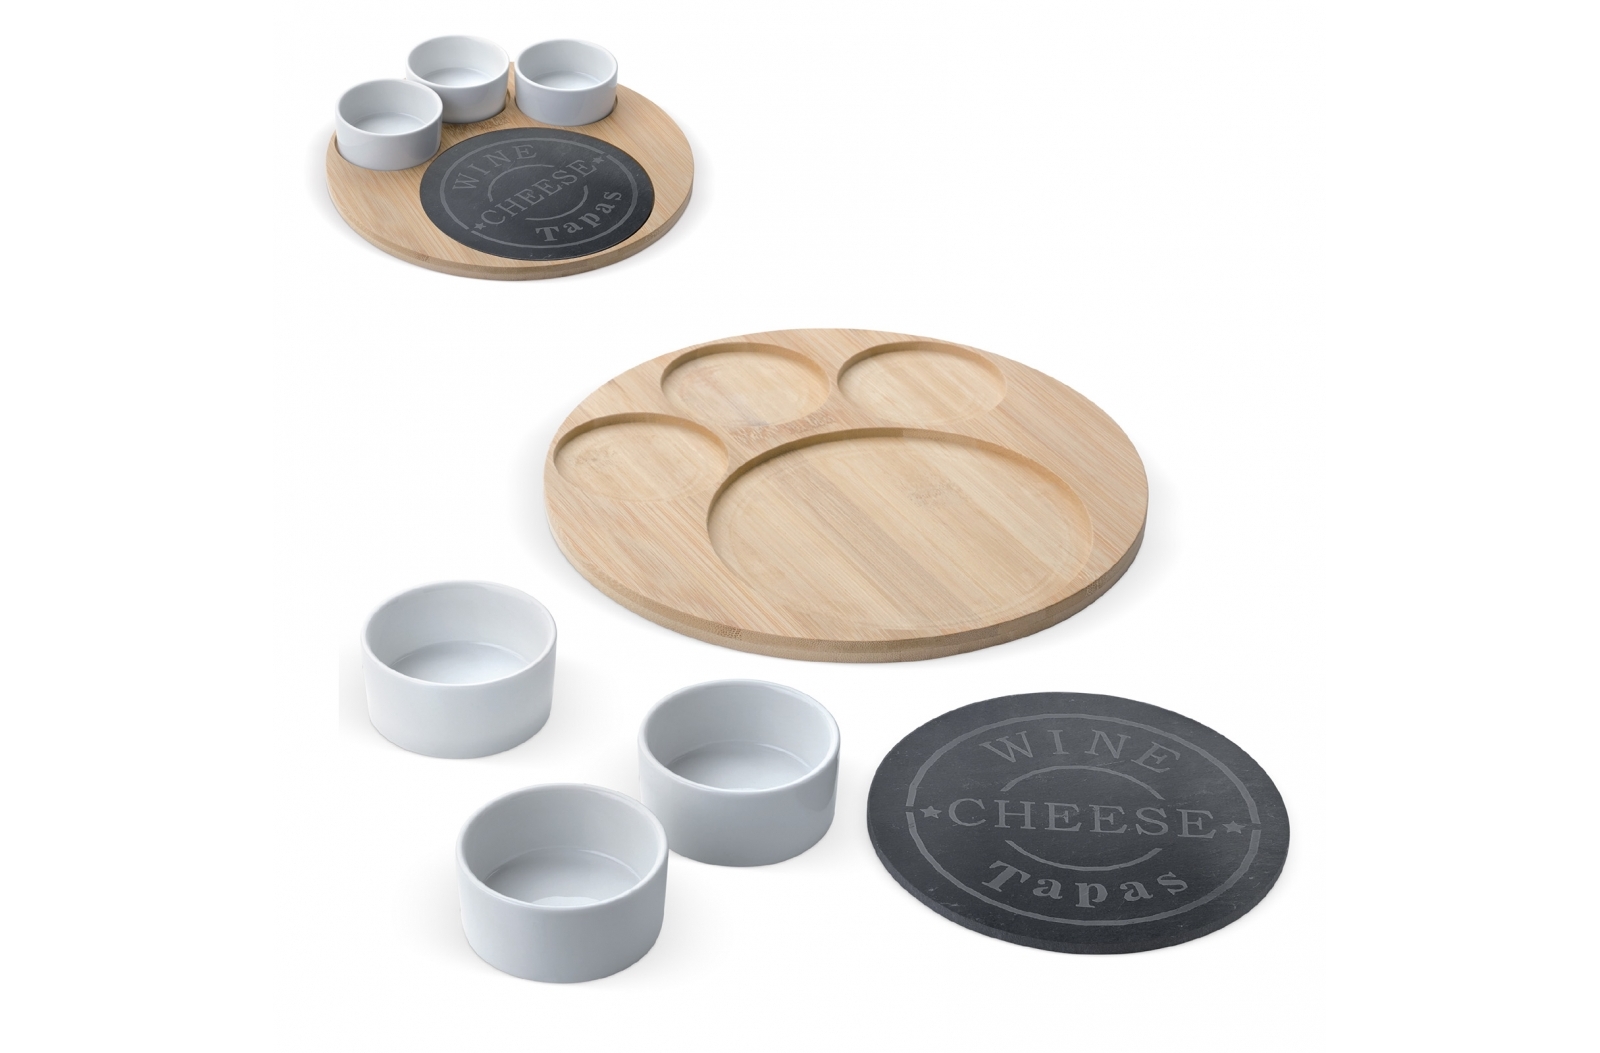 Wooden Tapas Serving Set with Slate Board and Ceramic Bowls - Belgrave